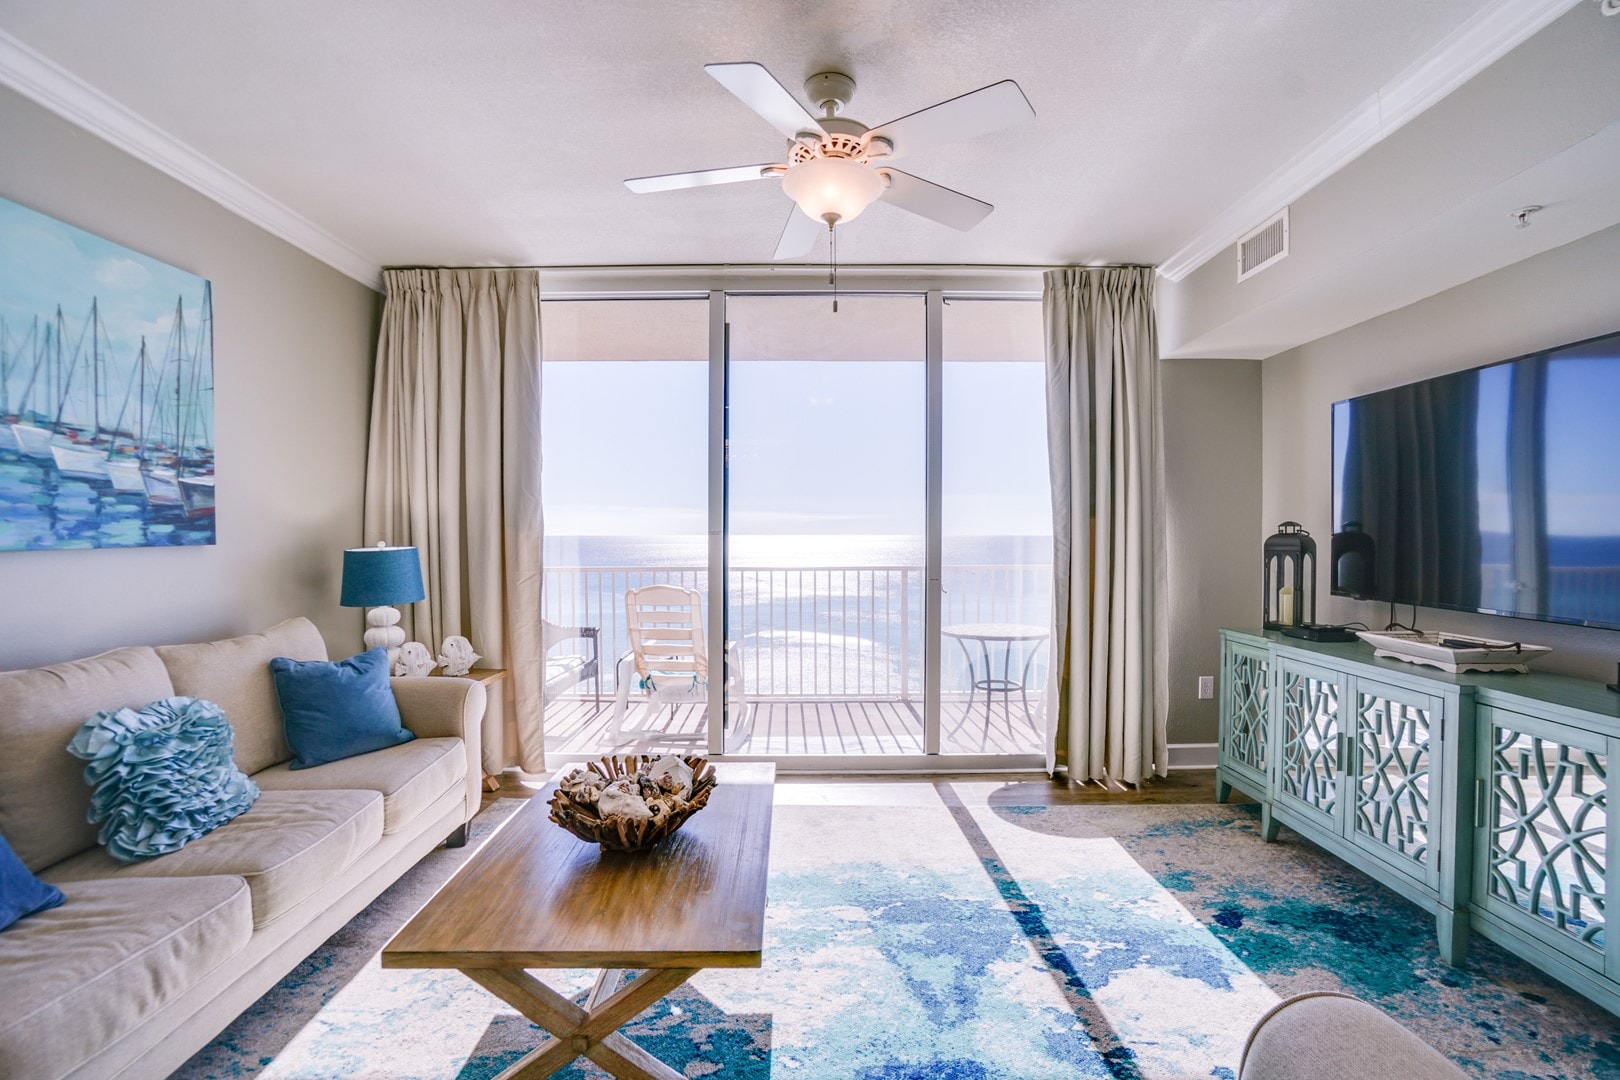 Living Area with Direct Beach and Gulf Views